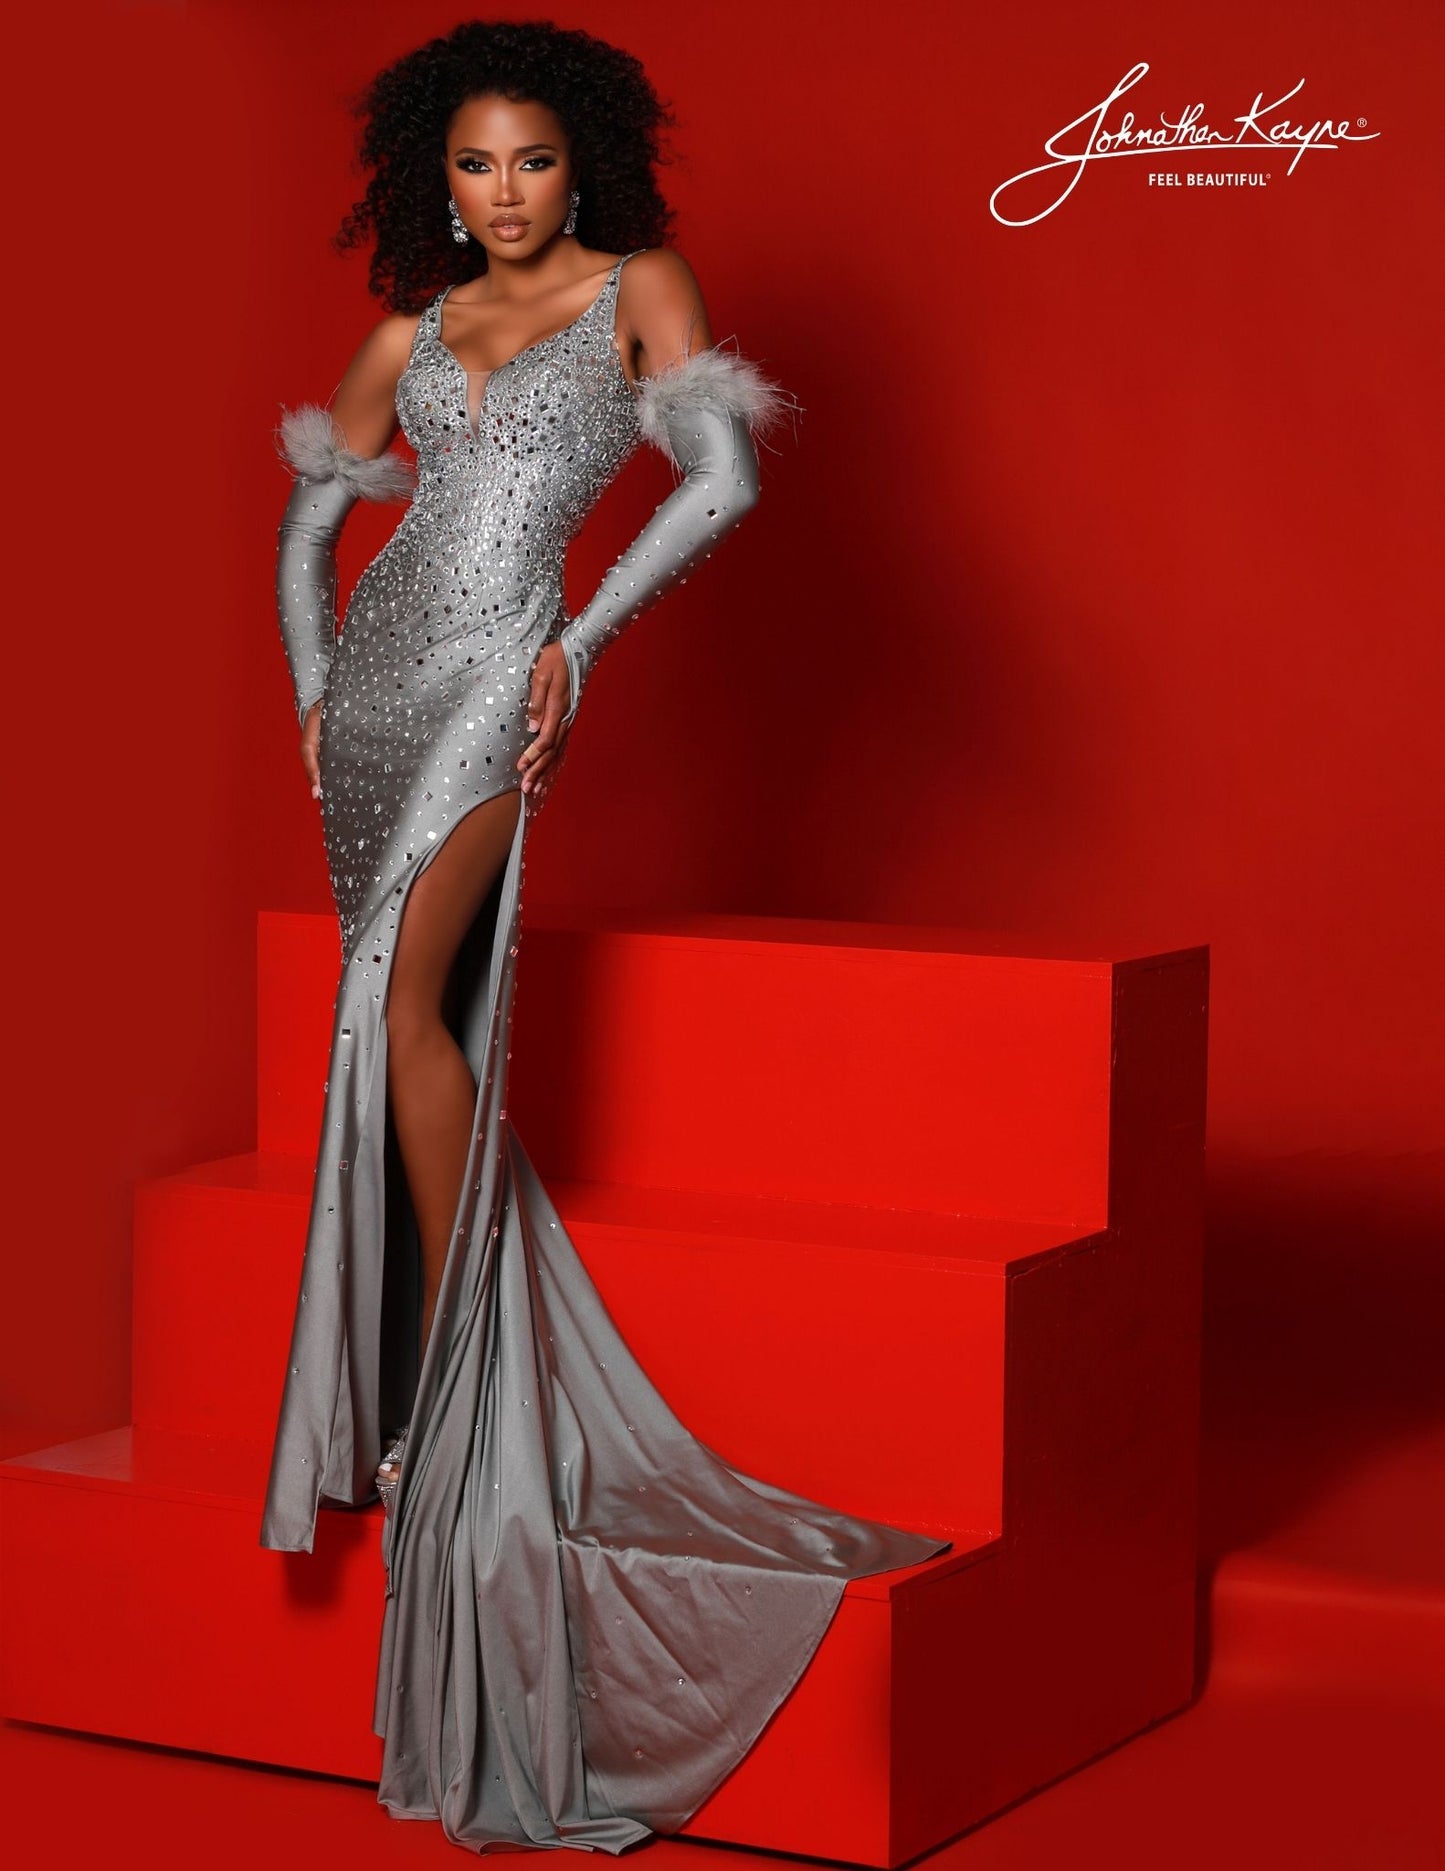 Be dazzling in this Johnathan Kayne 2720 evening gown. Its sleek crystal jersey bodice, Feathered trimmed glove sleeves, and graceful jersey skirt with a high slit create a silhouette that will turn heads wherever you go. Make your mark with this unforgettable style.   Sizes: 00,0,2,4,6,8,10,12,14,16  Colors: Black, Silver, Red, White , Royal